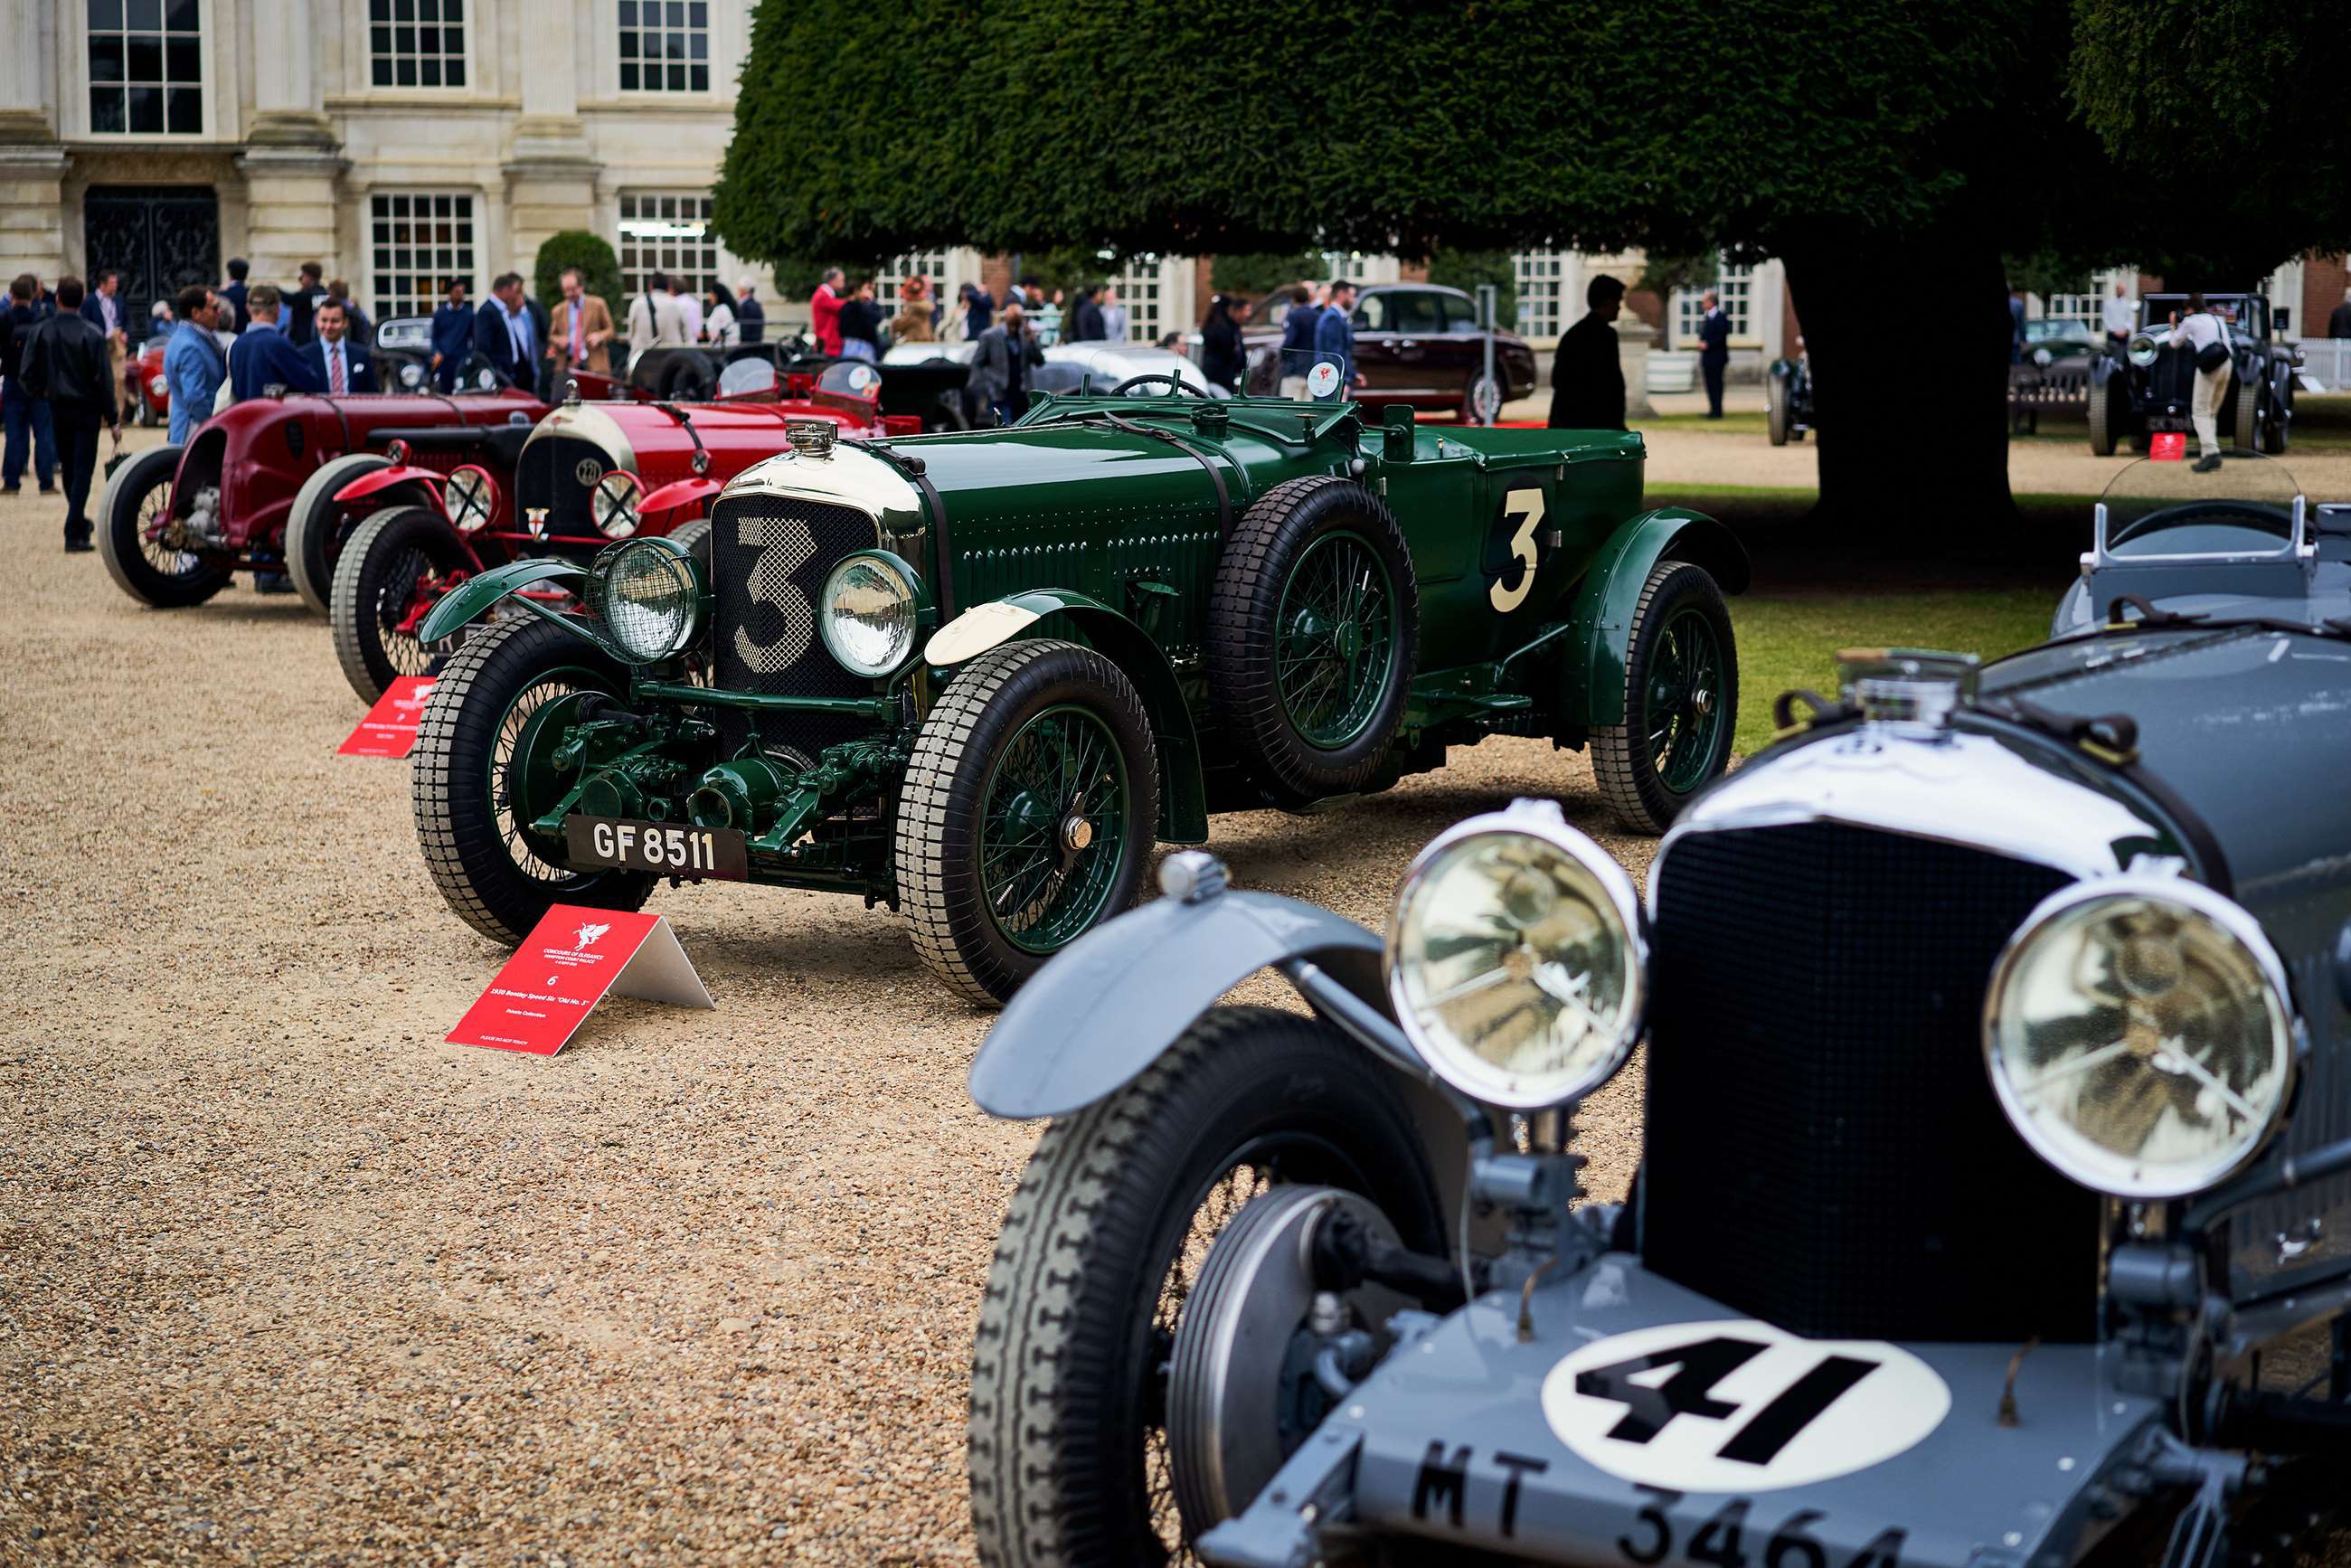 bentley-collection-concours-of-elegance-2019-james-lynch-goodwood-10092019.jpg